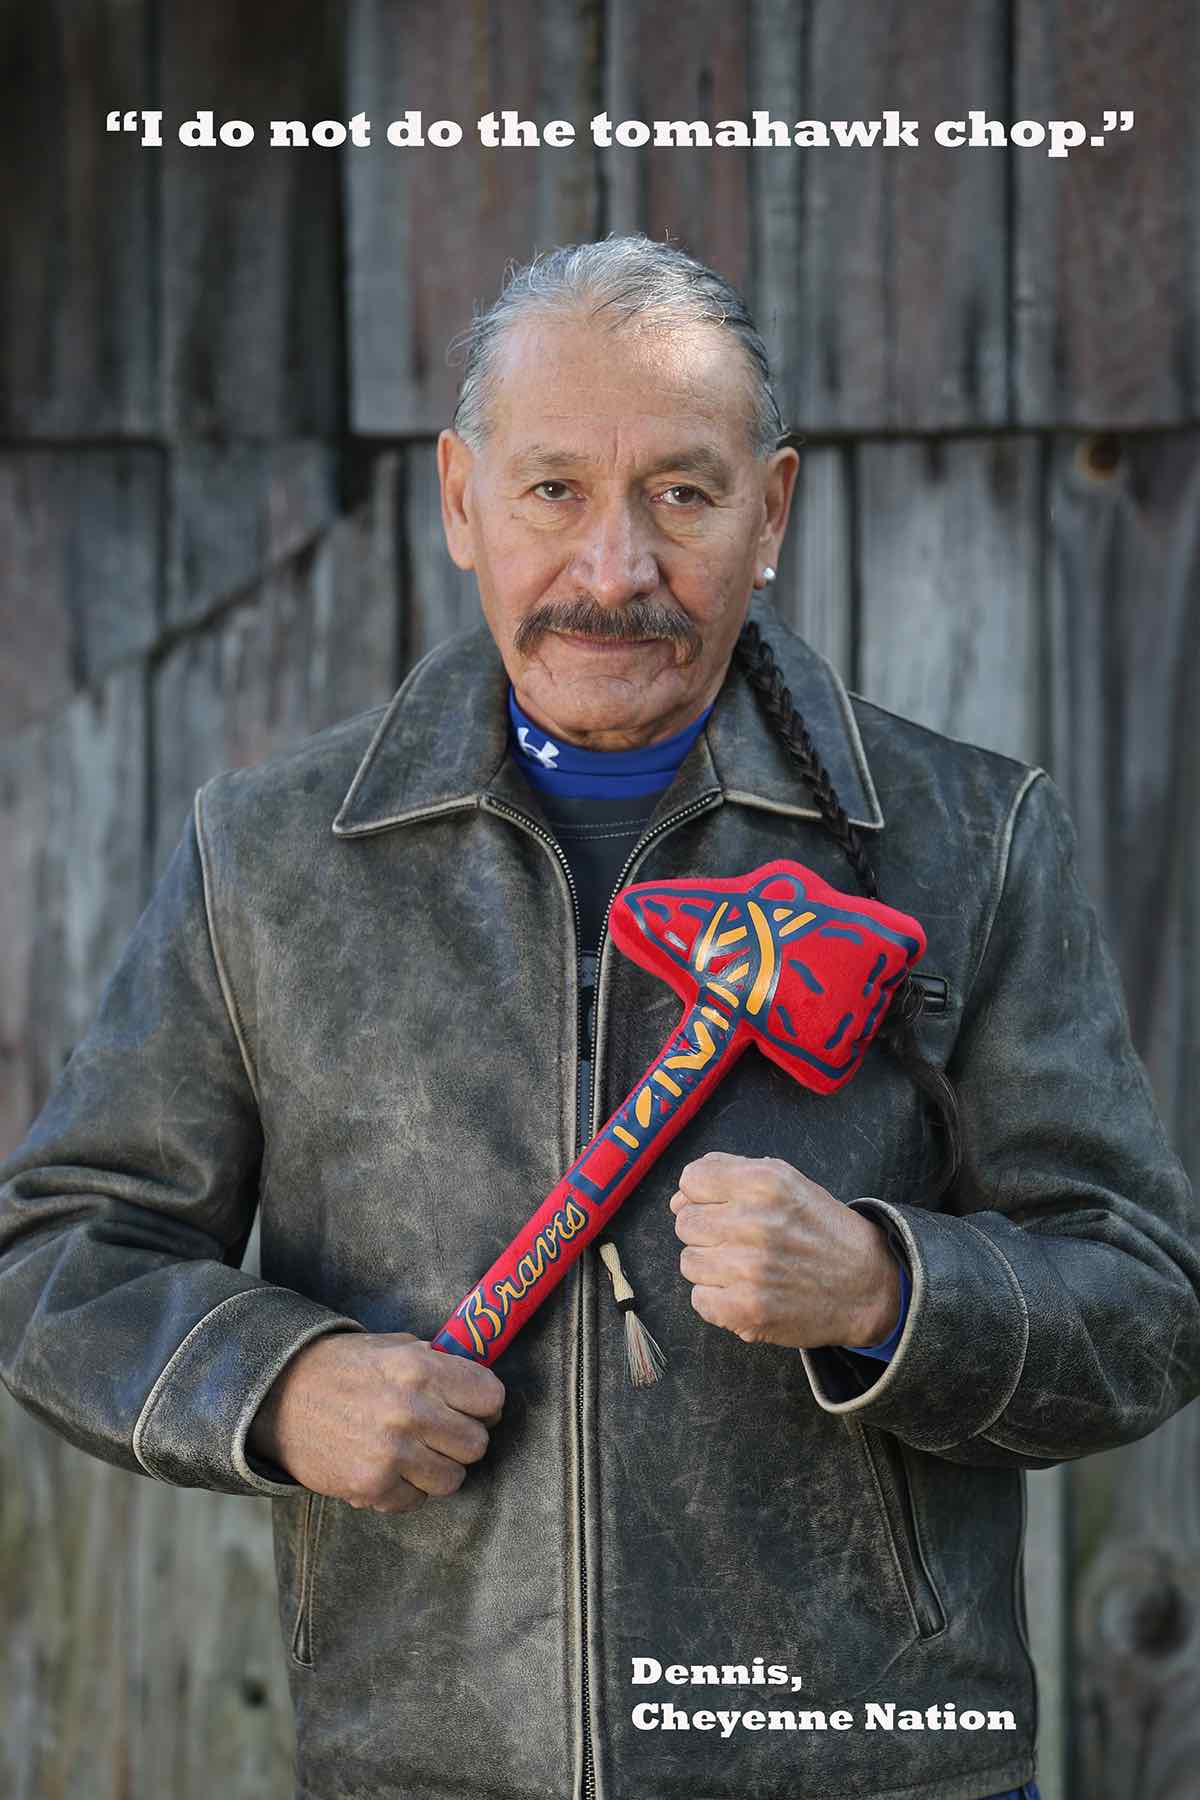 Photo of a man holding a tomahawk. Text on the photo reads "I do not do the tomahawk chop." Dennis, Cheyenne Nation